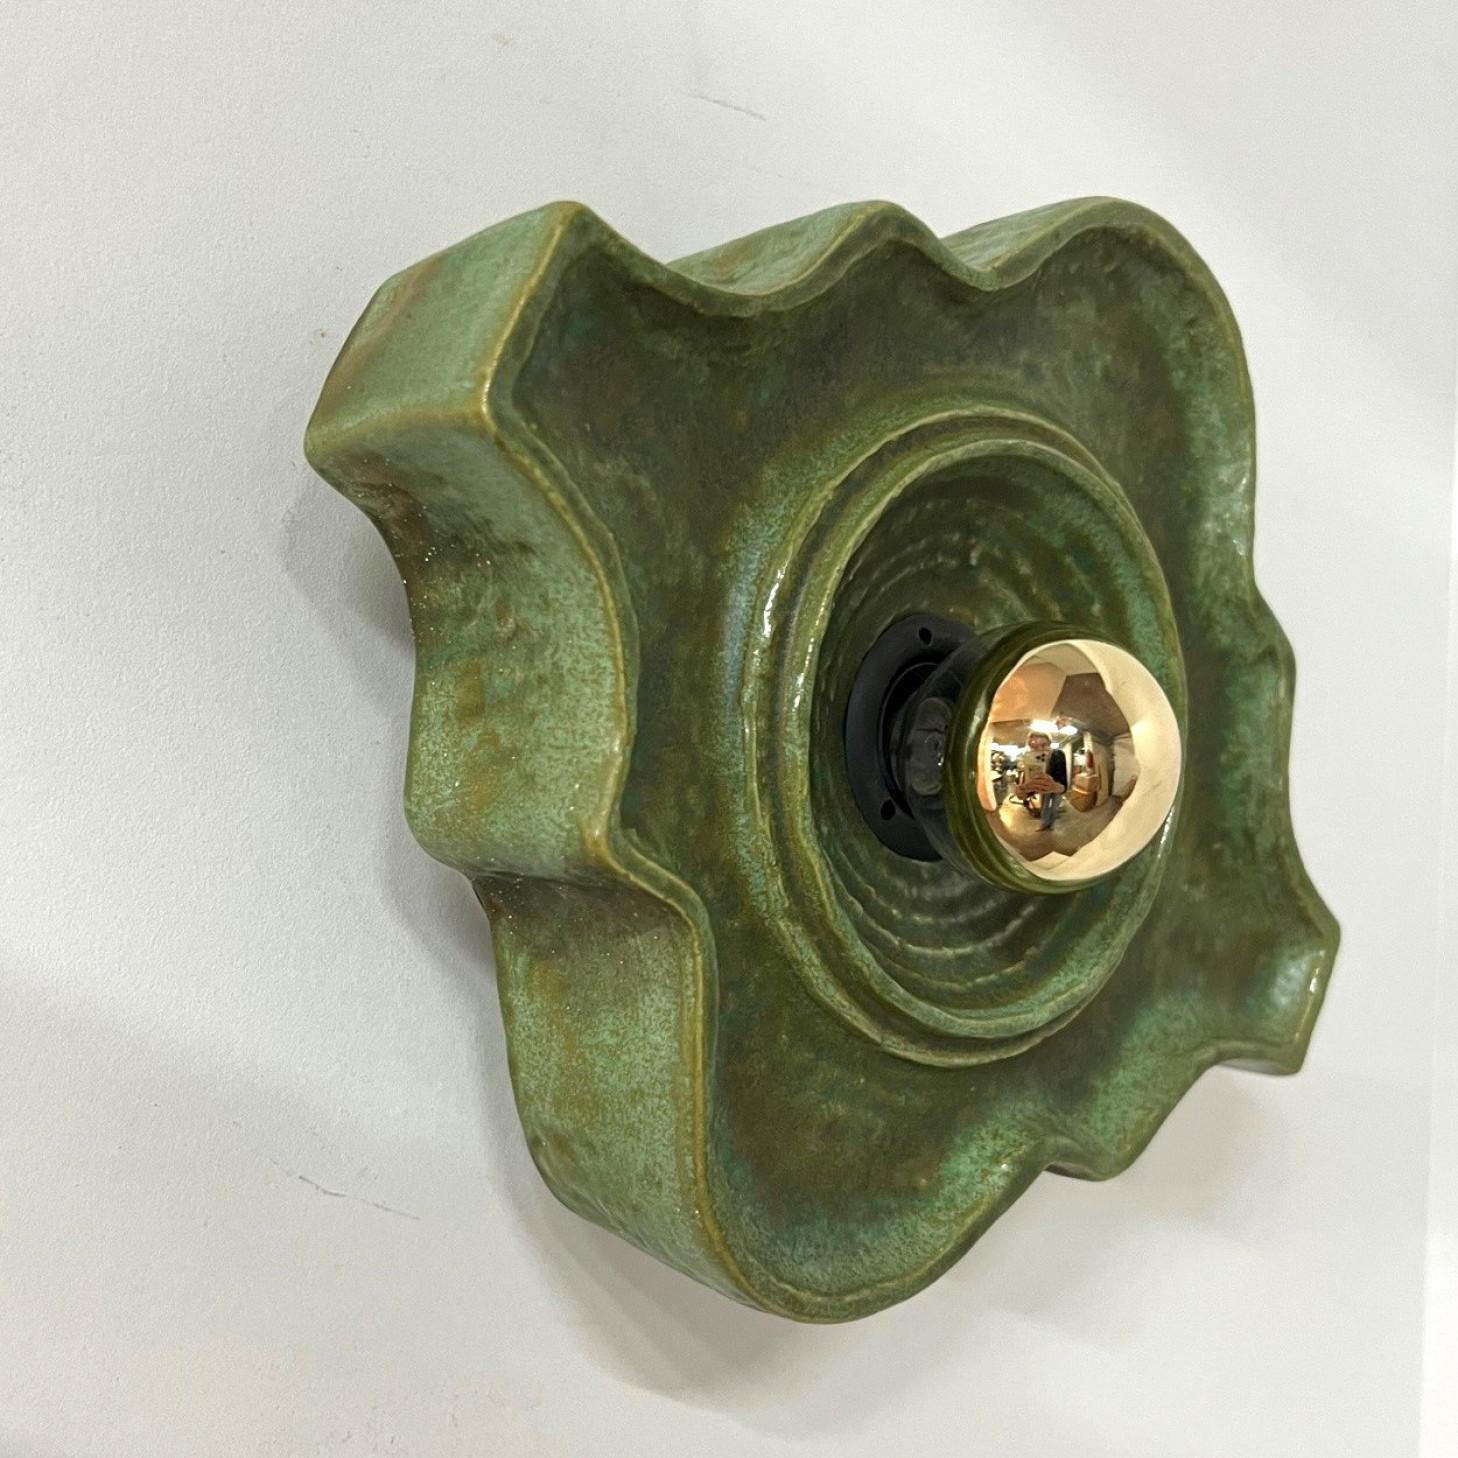 Other 1 of the 4 Green Ceramic Wall Lights Keramik, Germany, 1960s